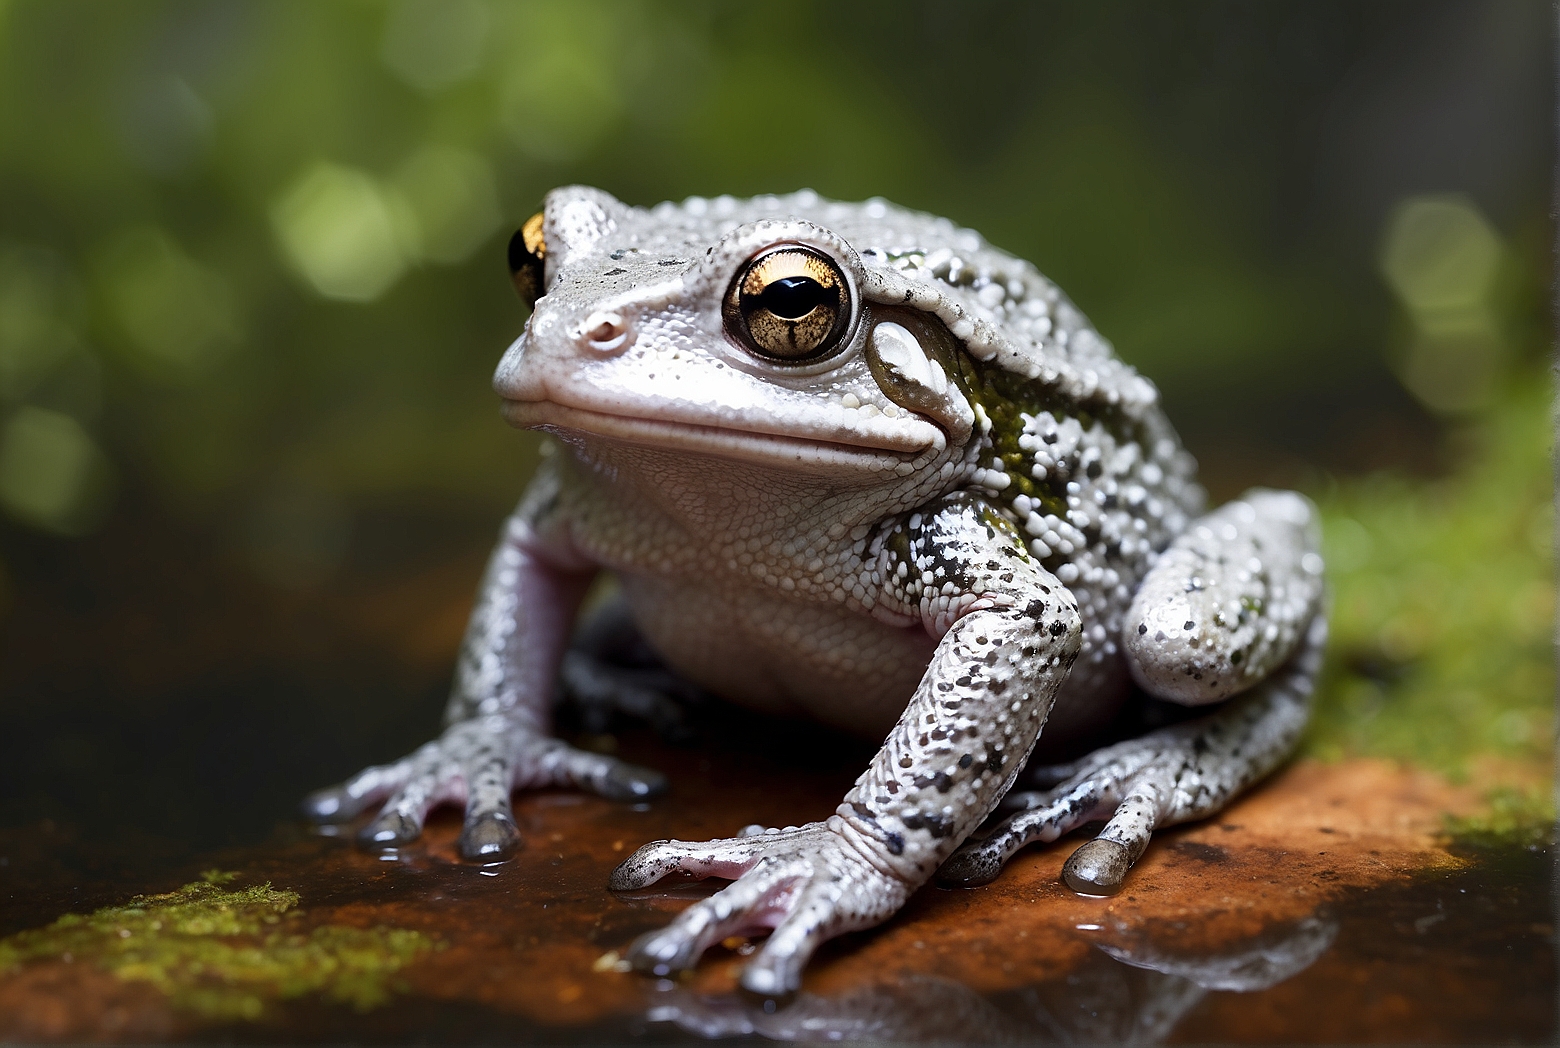 Is the Gray Tree Frog Poisonous?